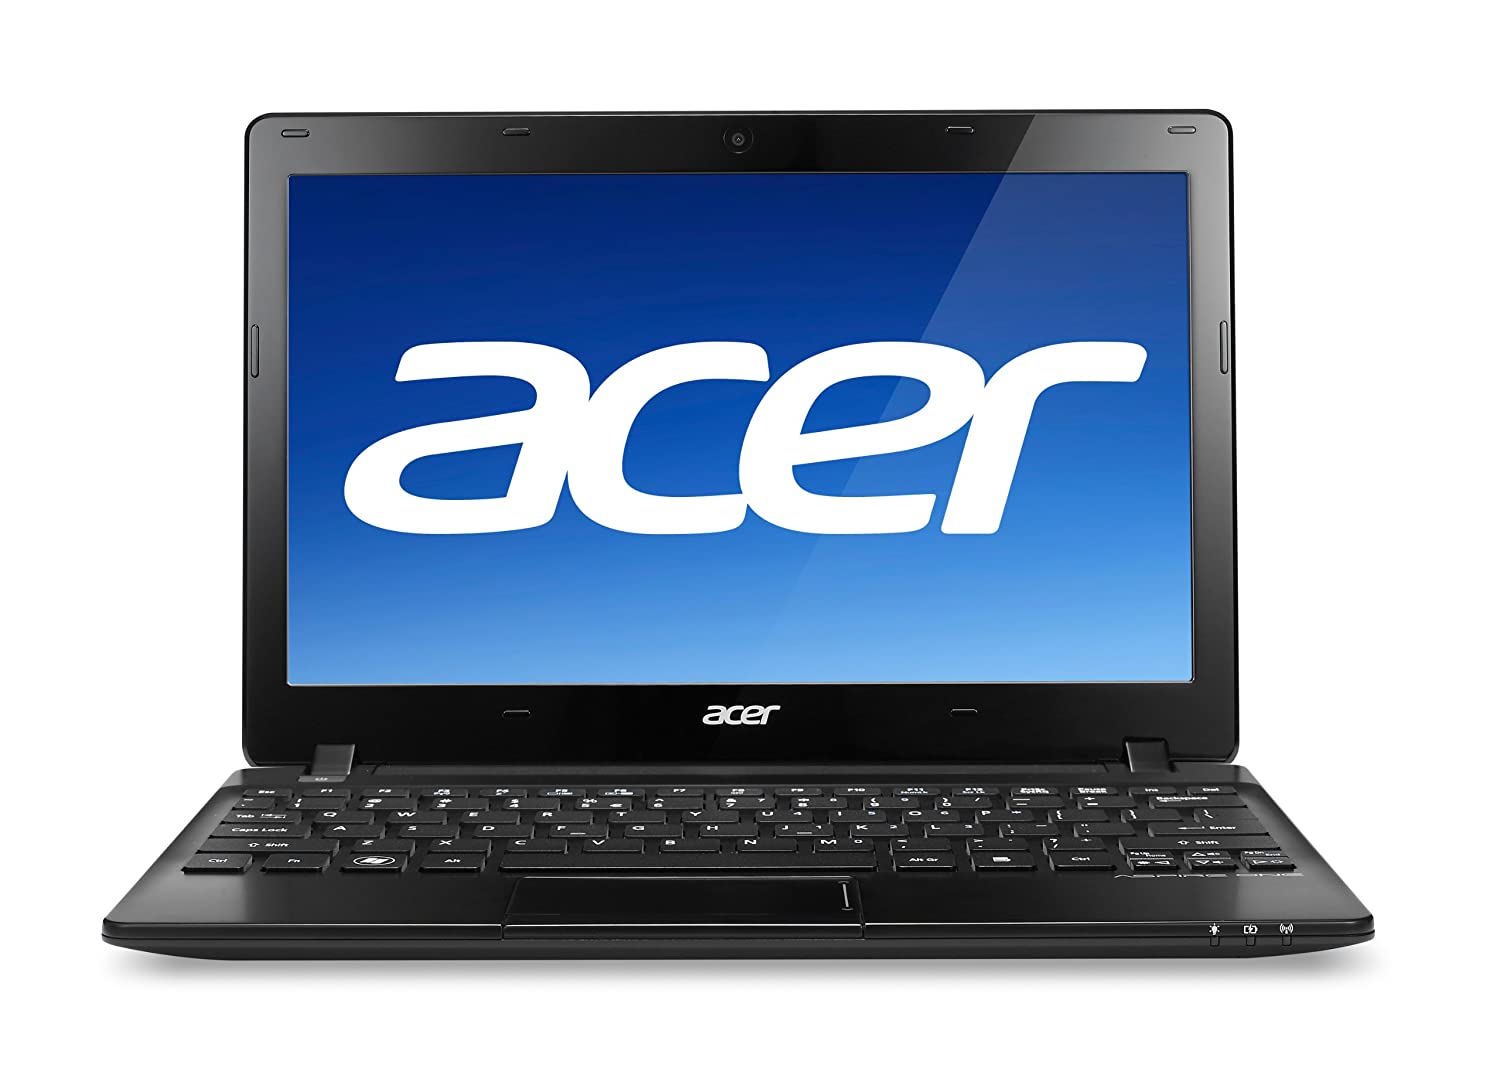 acer aspire one 725